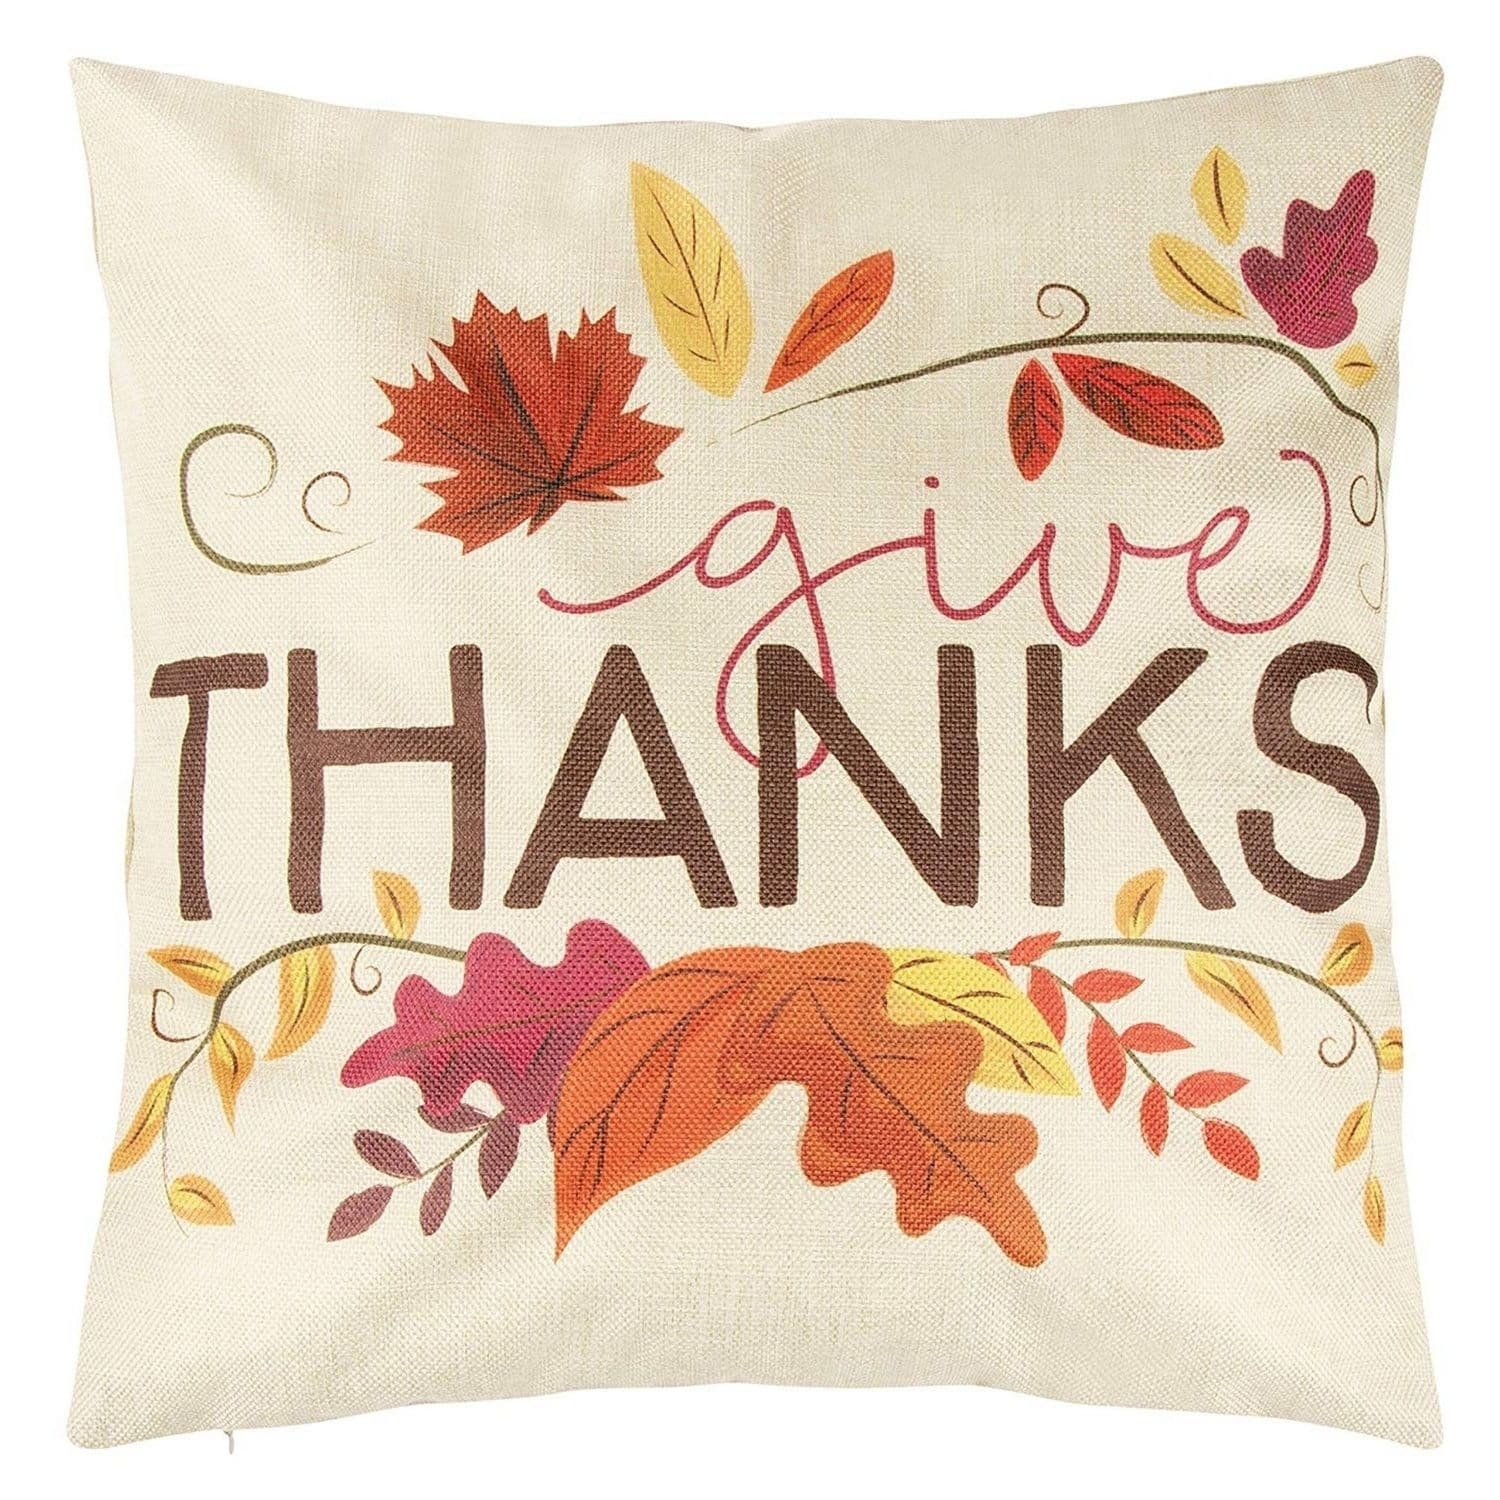 4 Thanksgiving Throw Pillow Covers, Country Style Home Decor, 18 x 18 Pillows